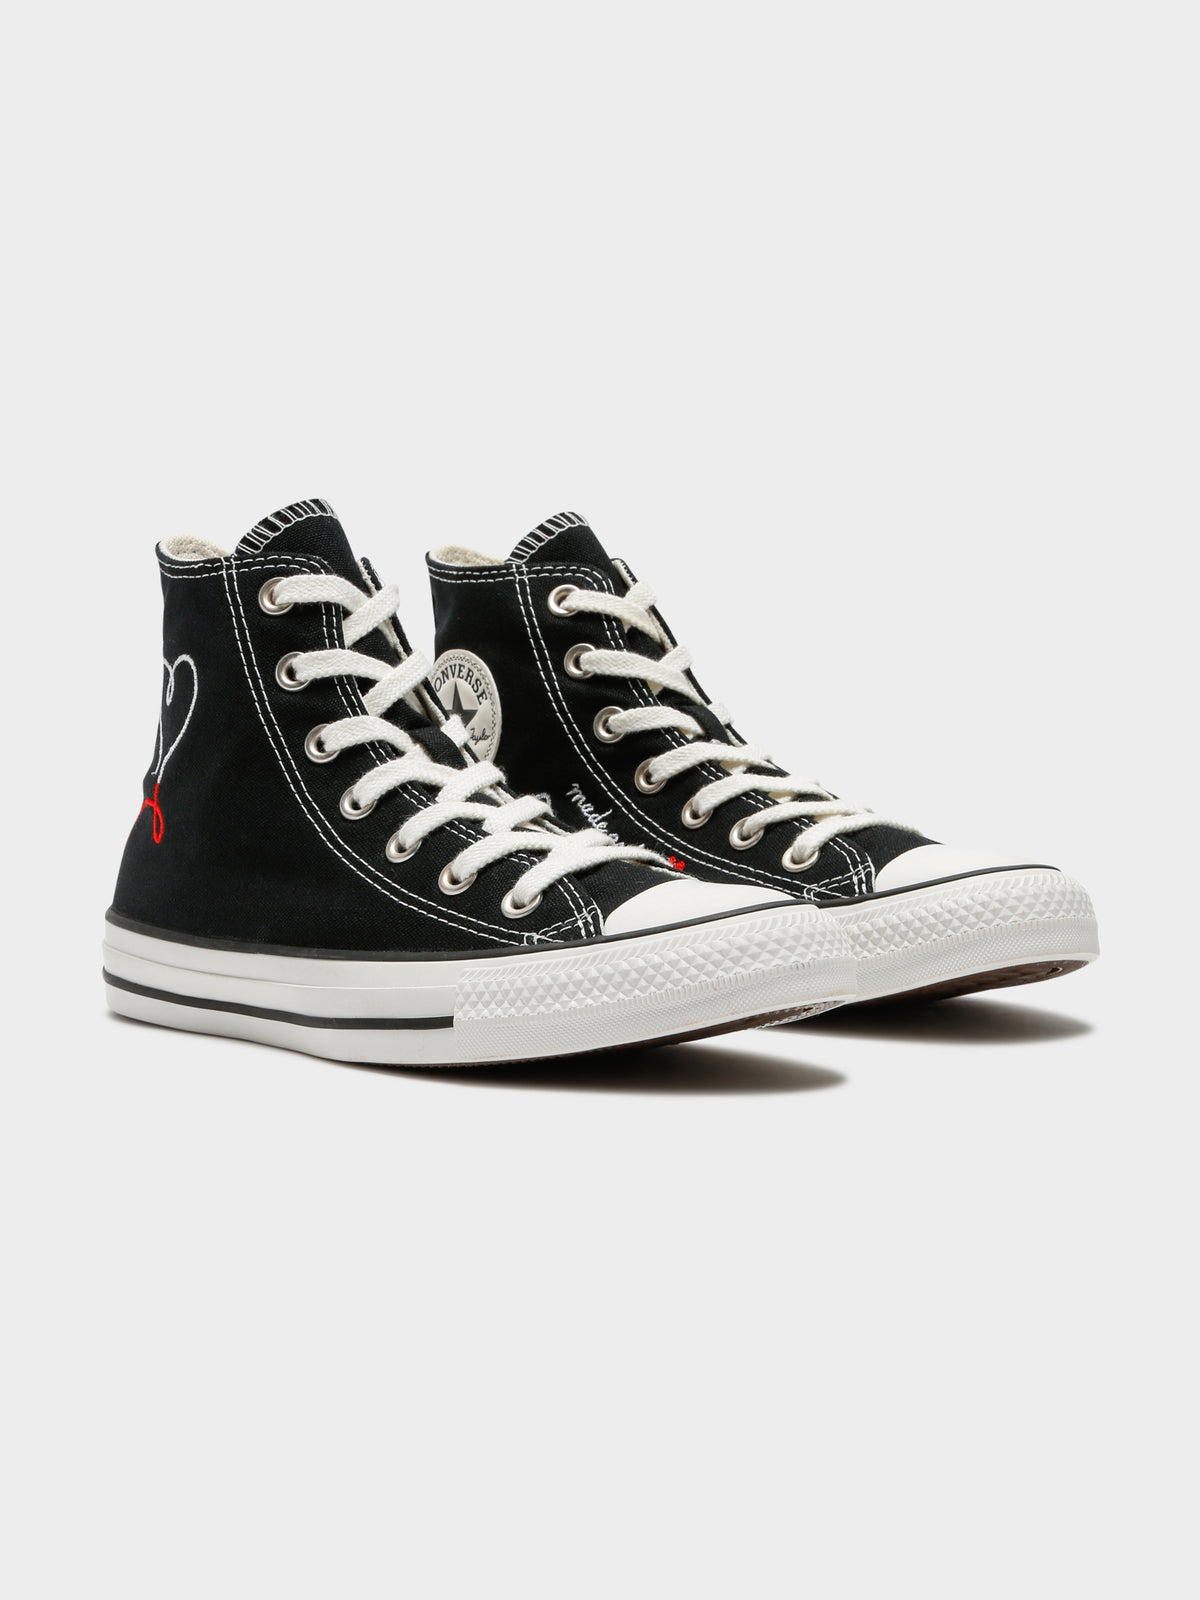 Unisex Made With Love Chuck Taylor All Star High Top Sneakers in Black